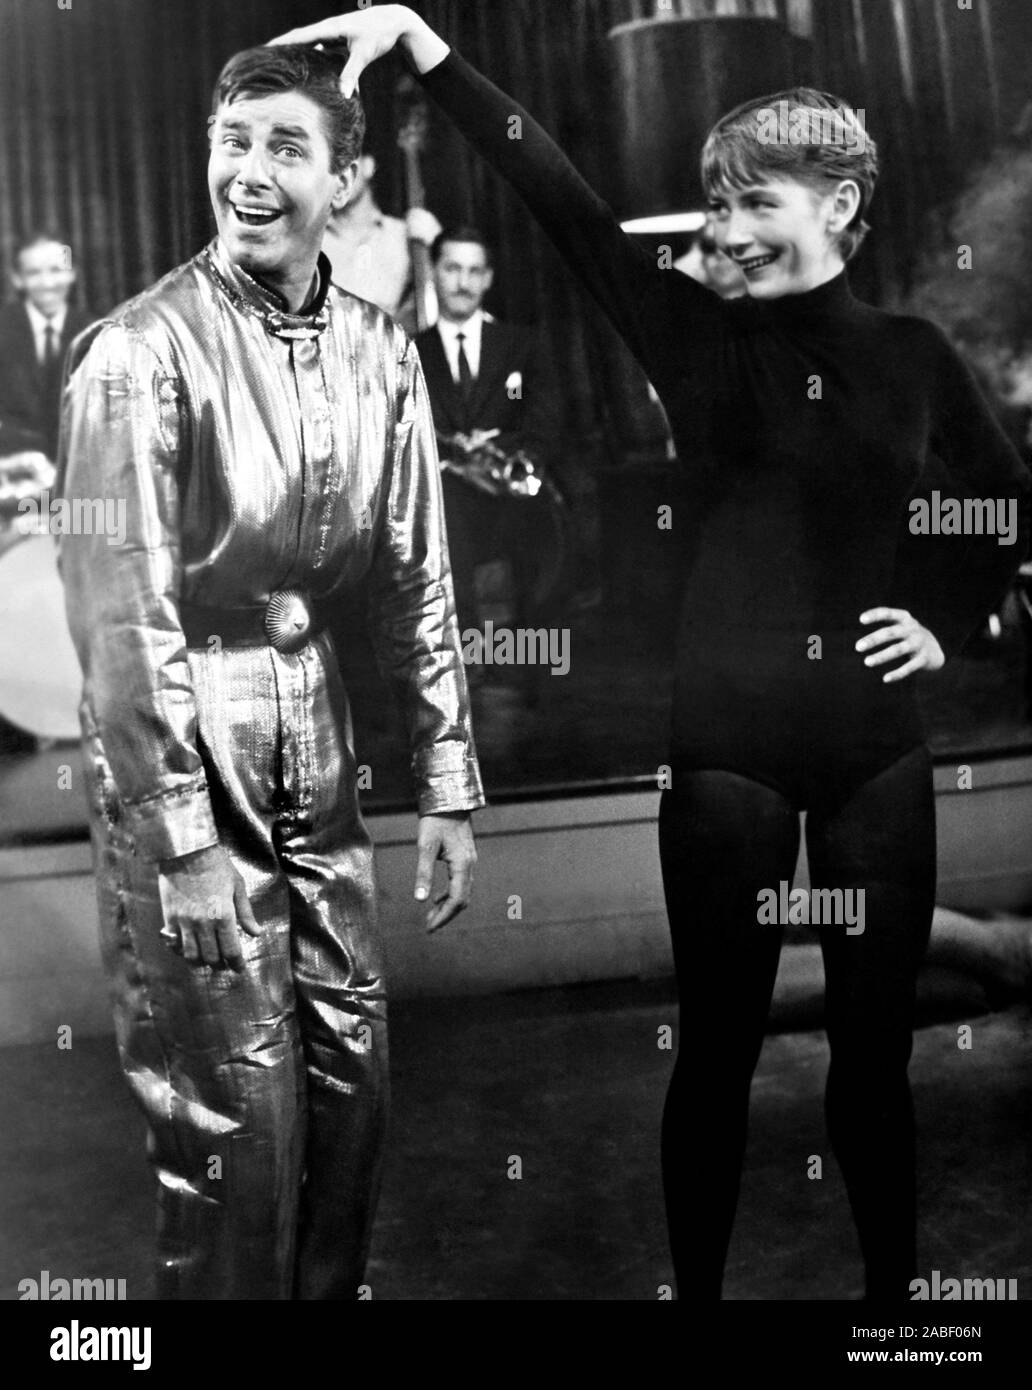 VISIT TO A SMALL PLANET, from left, Jerry Lewis, Barbara Lawson, 1960 Stock Photo